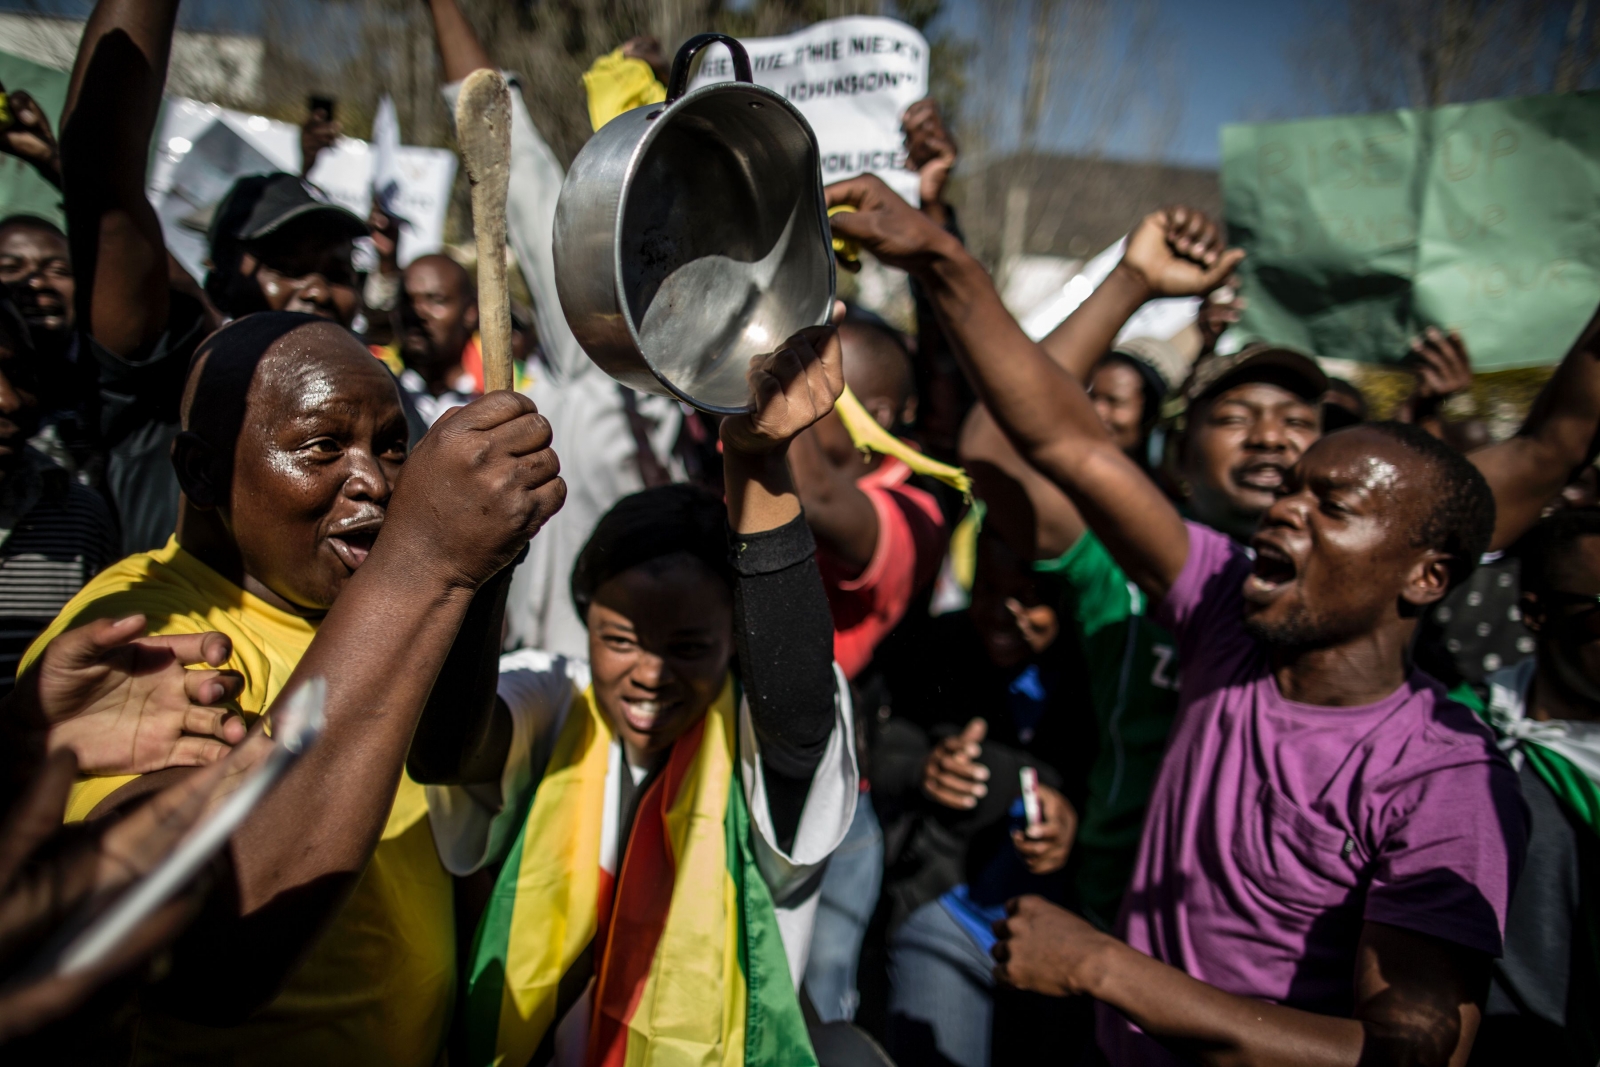 #NoToBondNotes marches in Zimbabwe: why the protests?